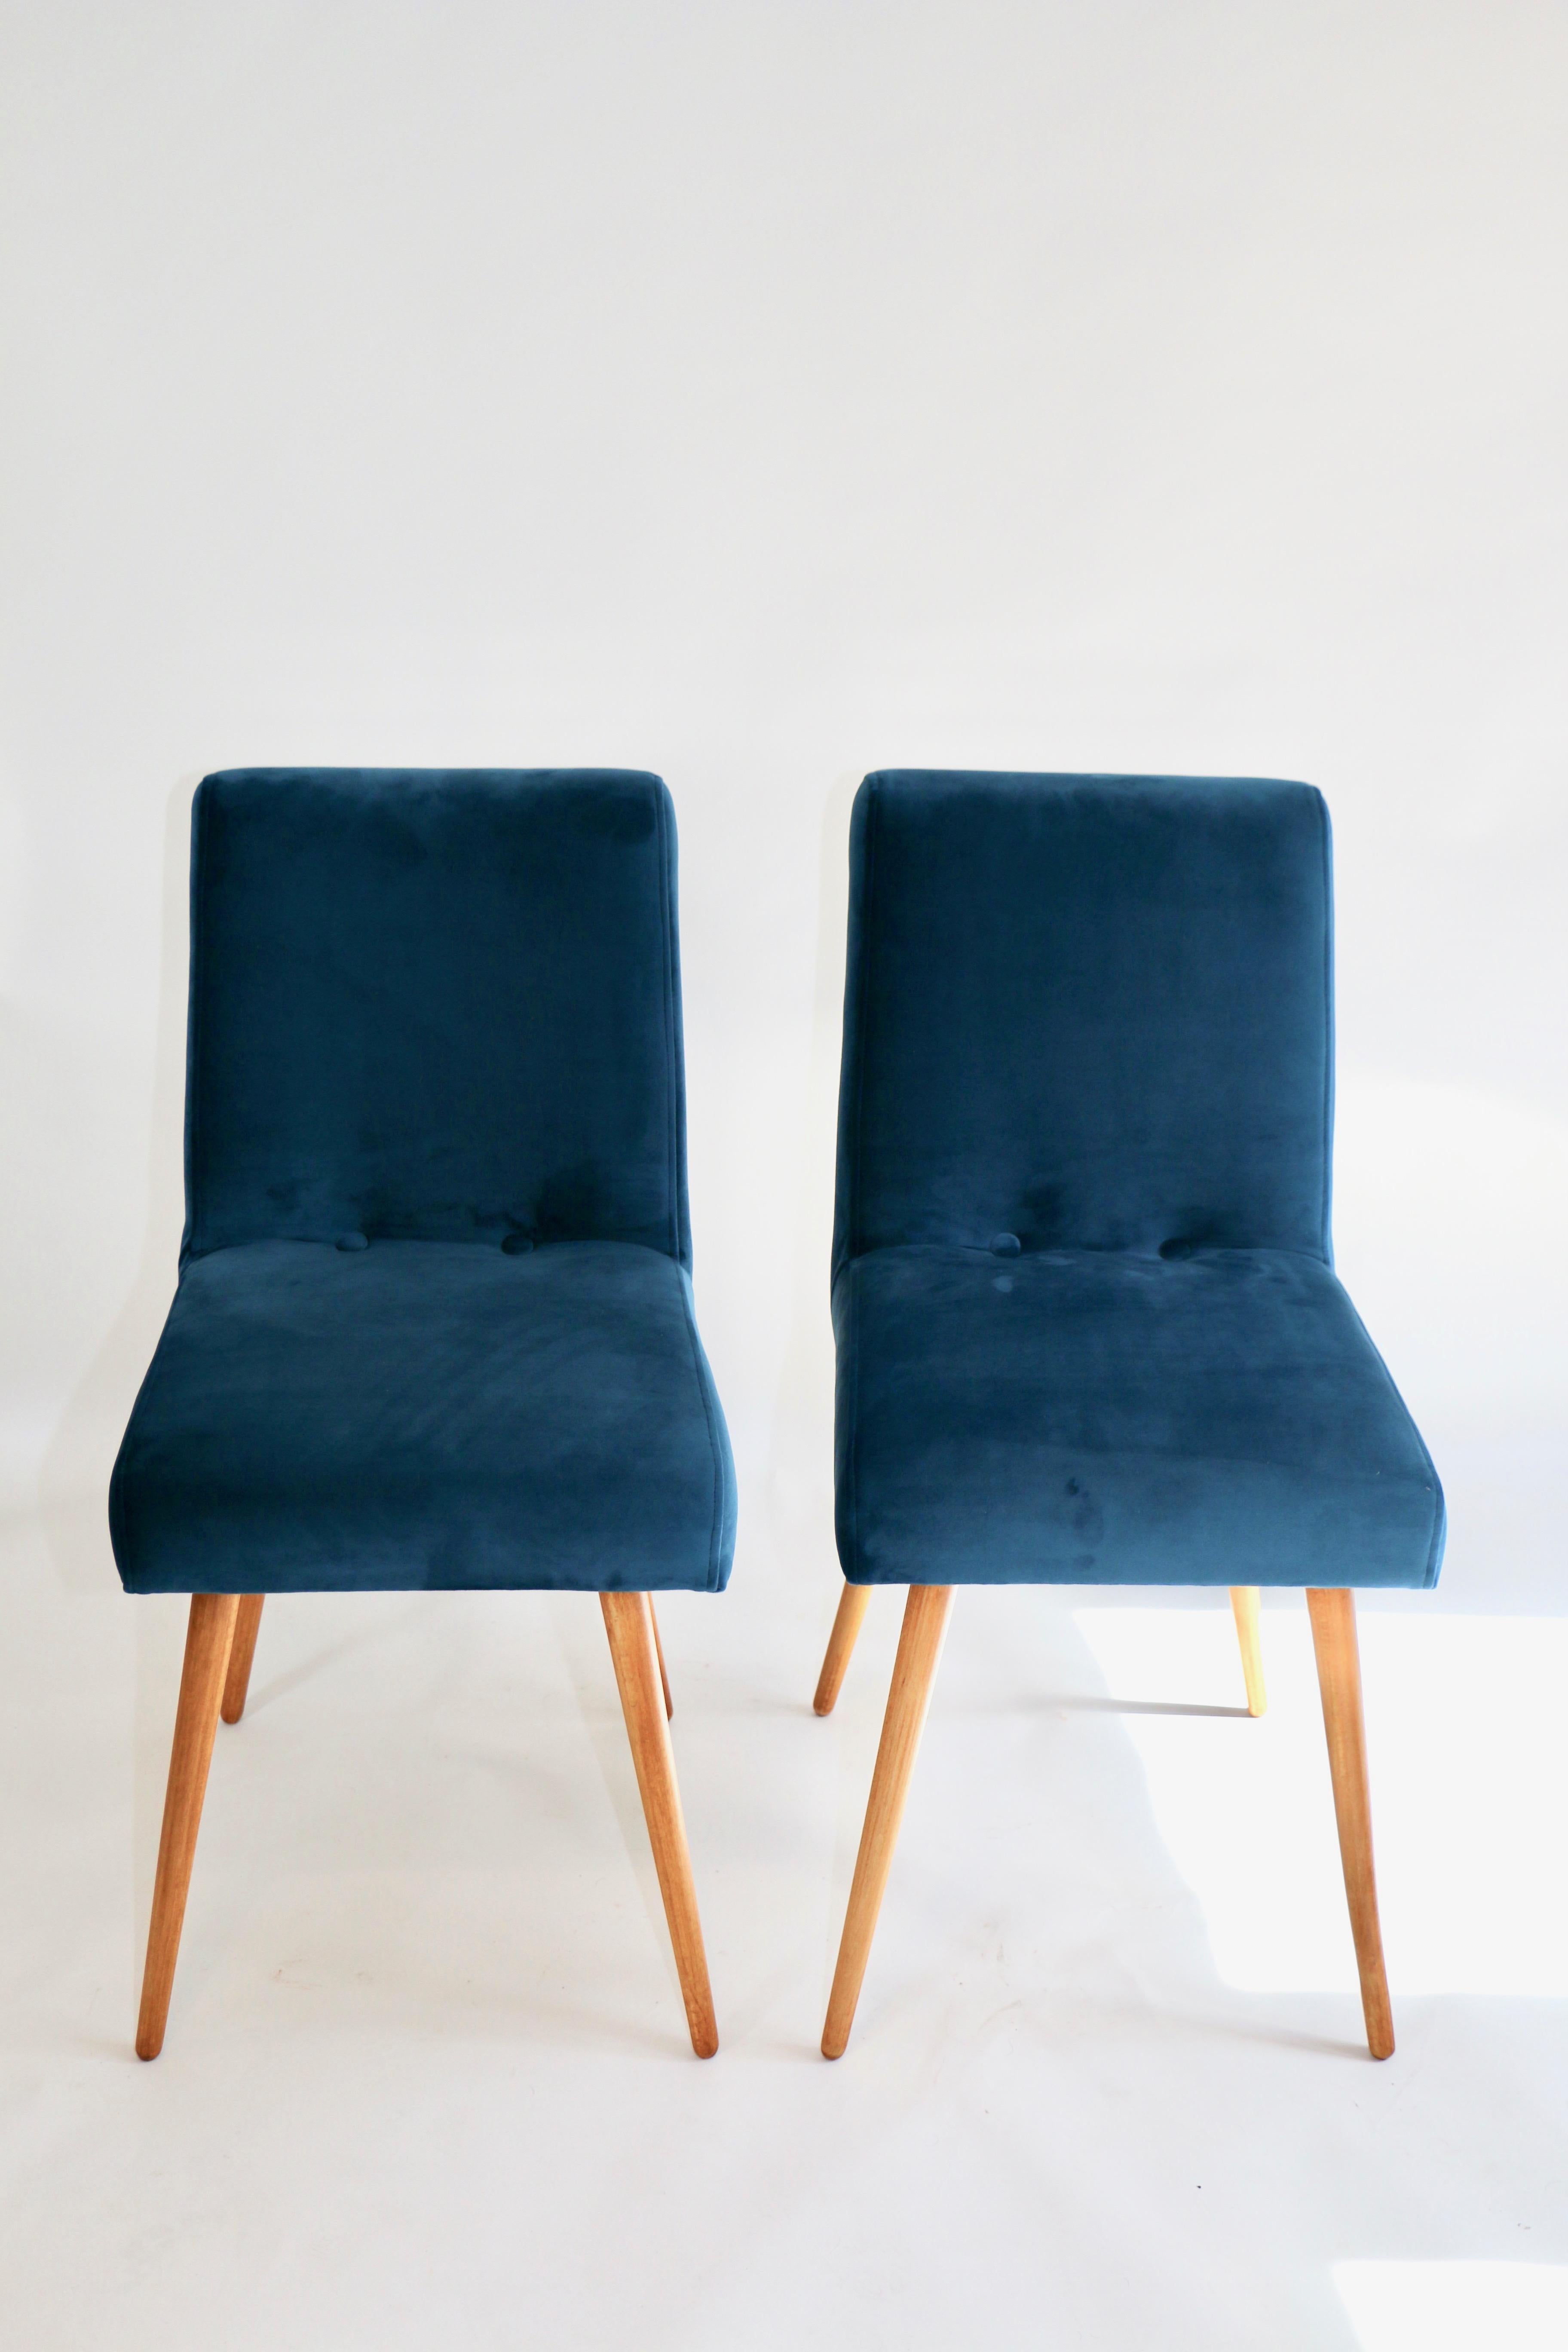 Set of two blue chairs from 1970s, new upholstery covered with velvet fabric in fashionable blue marine color. Wooden elements in natural beech color. Completely restored. Perfect condition.


Dimension: H 83 x W 41 x D 50.